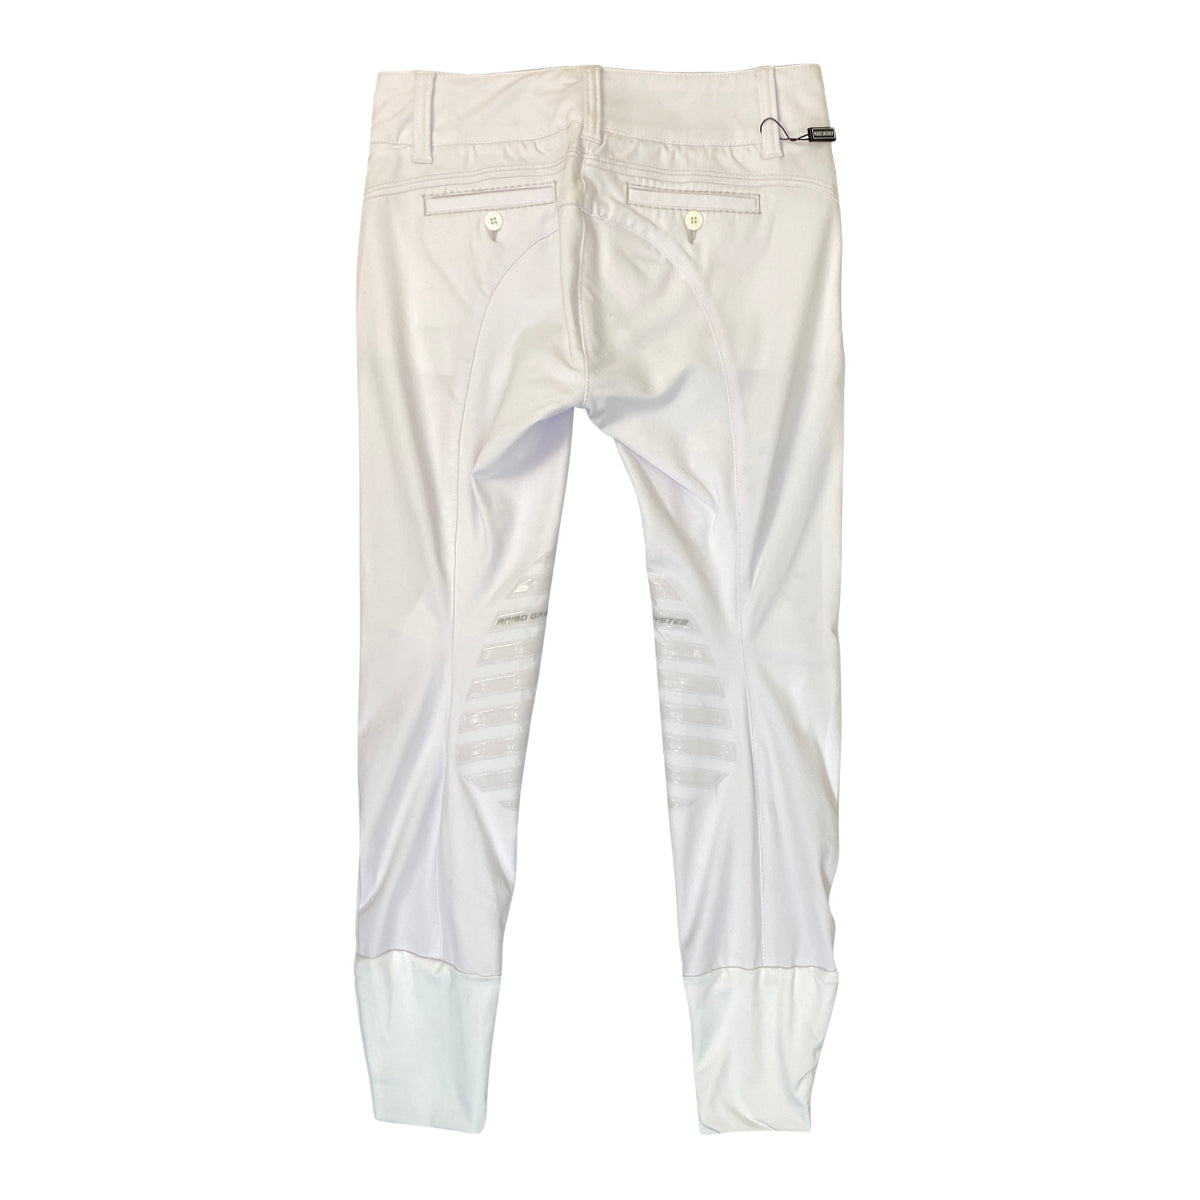 Animo &#39;Nomia&#39; Higher-Rise Breeches in White - Women&#39;s IT 42 (US 28)